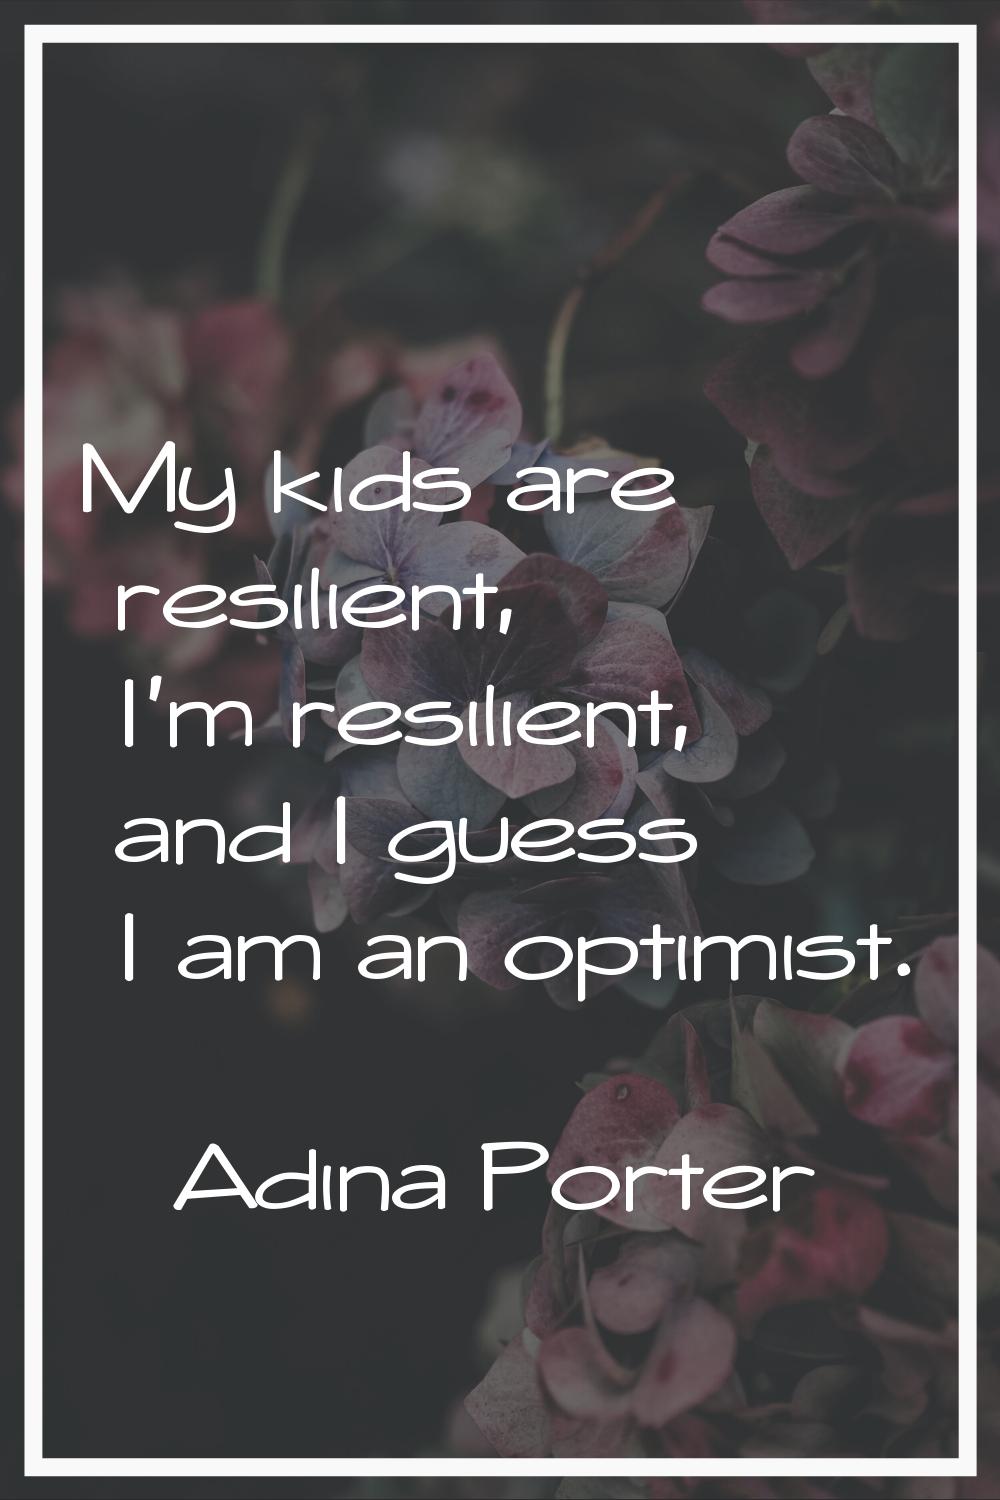 My kids are resilient, I'm resilient, and I guess I am an optimist.